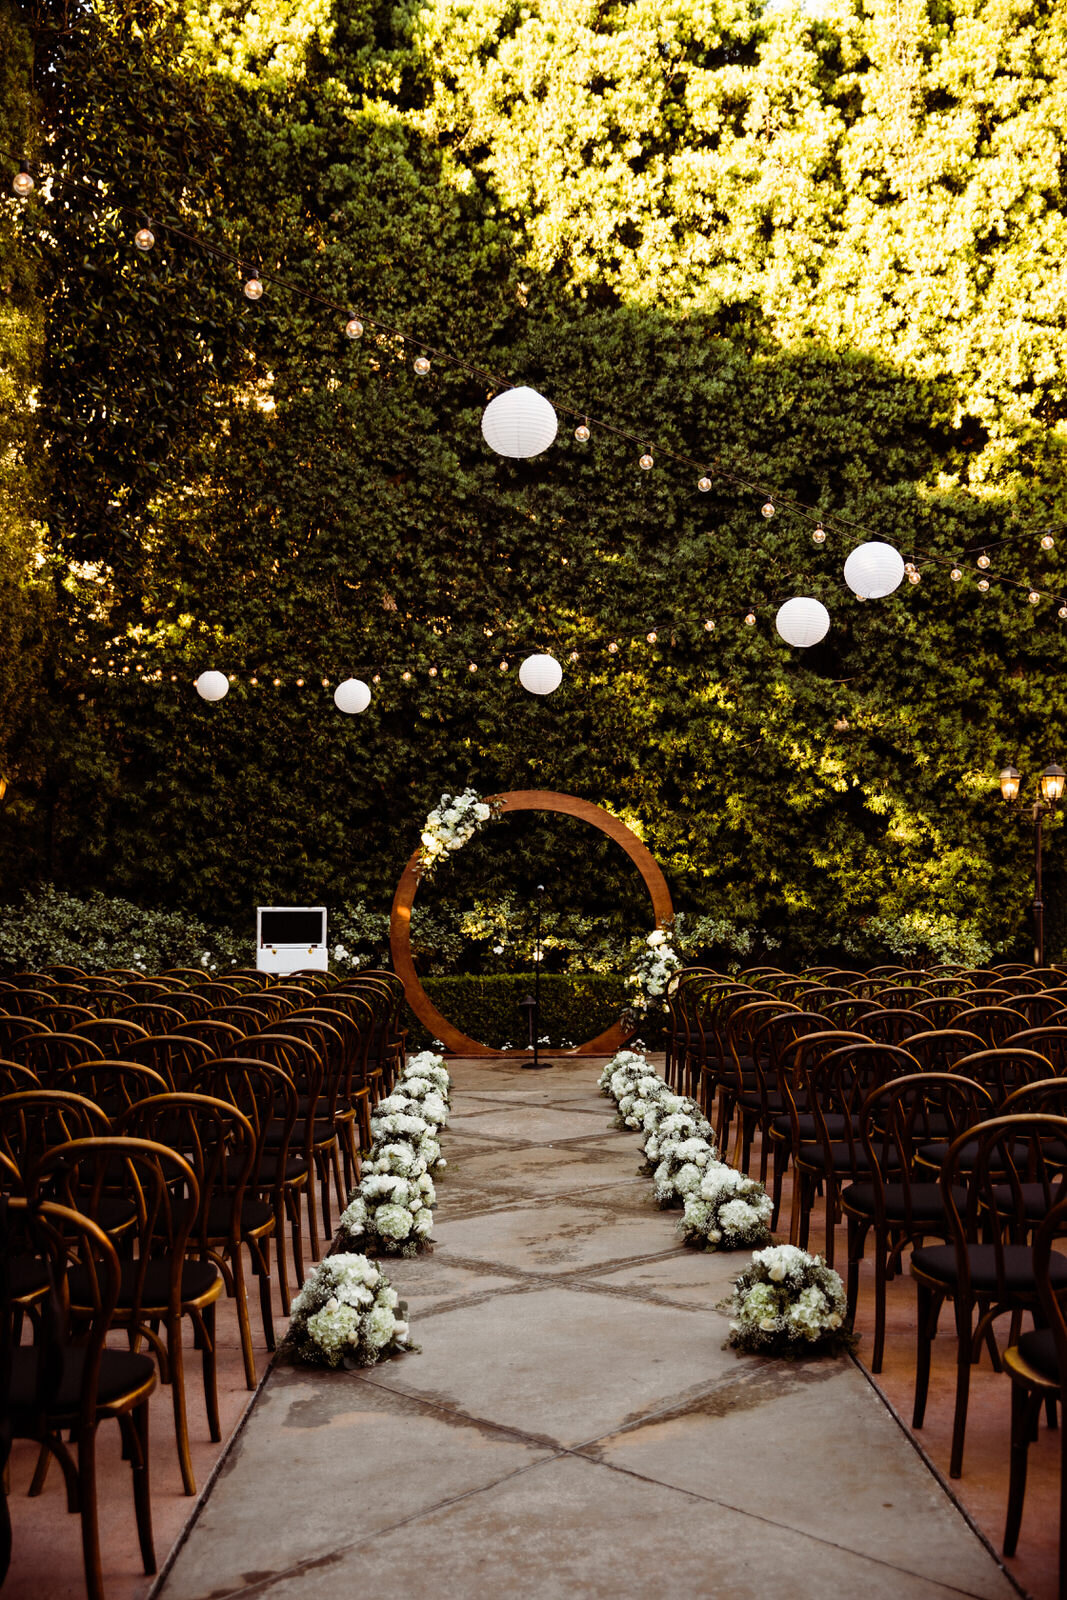 Ceremony space with wooden circle arch at Franciscan Gardens in San Juan Capistrano - Morgan Pirkle-Kept Record www.keptrecord.com